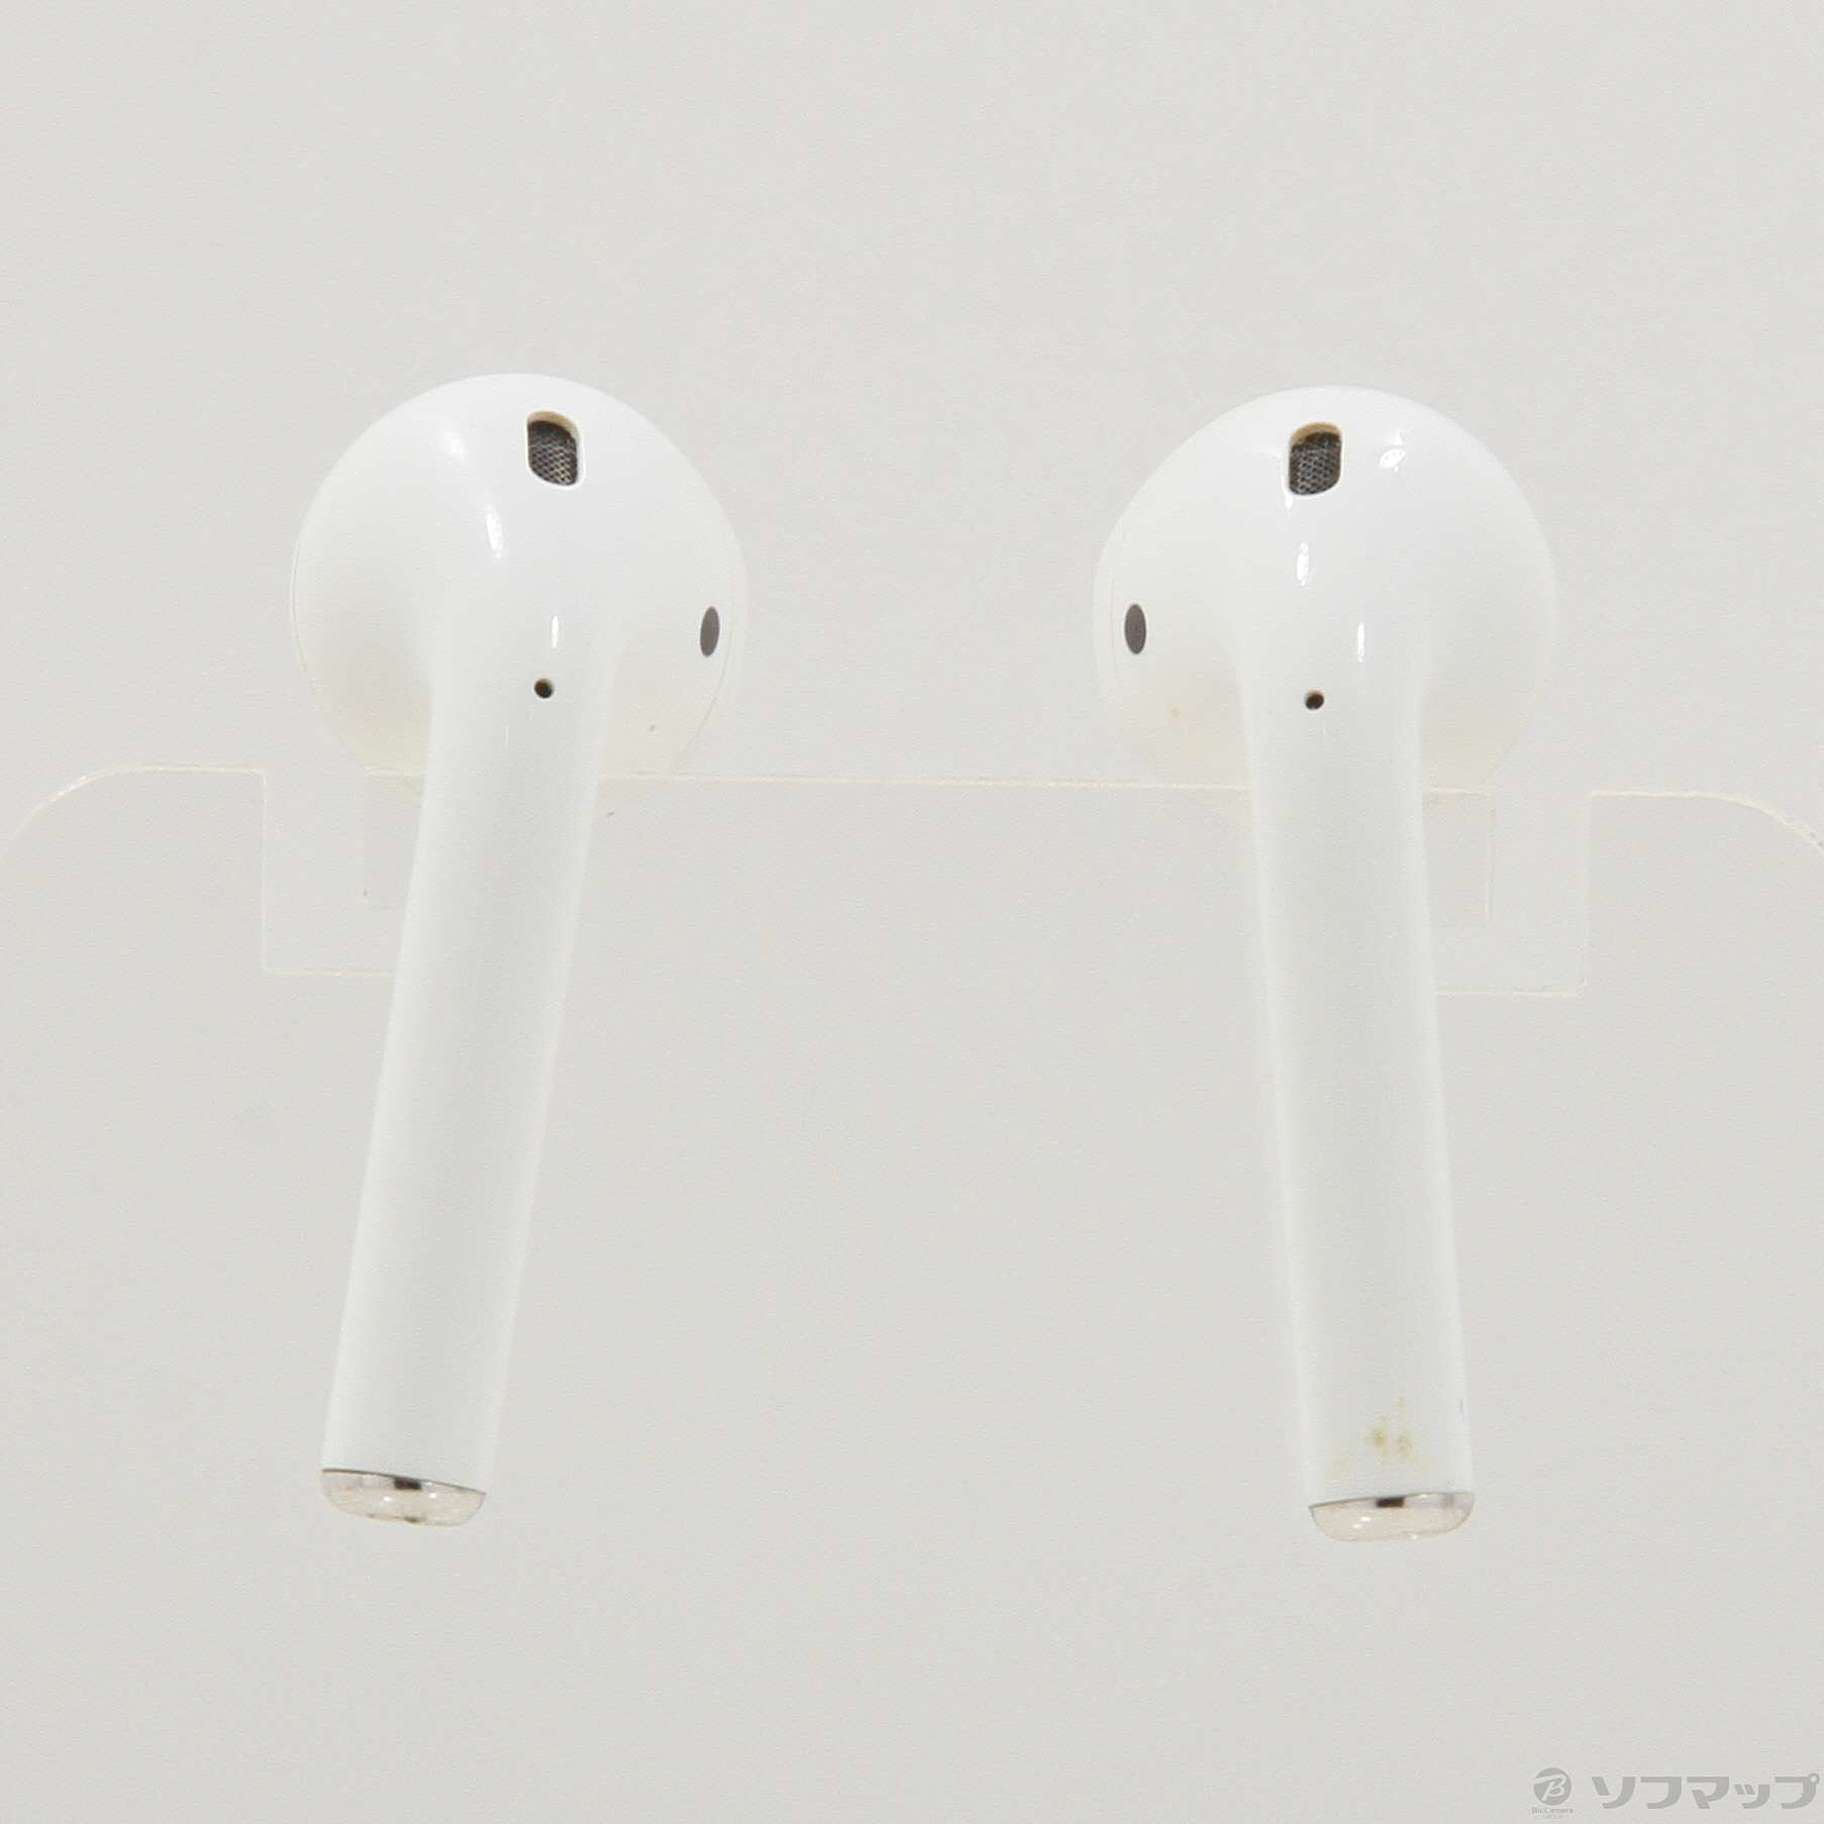 AirPods 第2世代 with Wireless Charging Case MRXJ2J／A